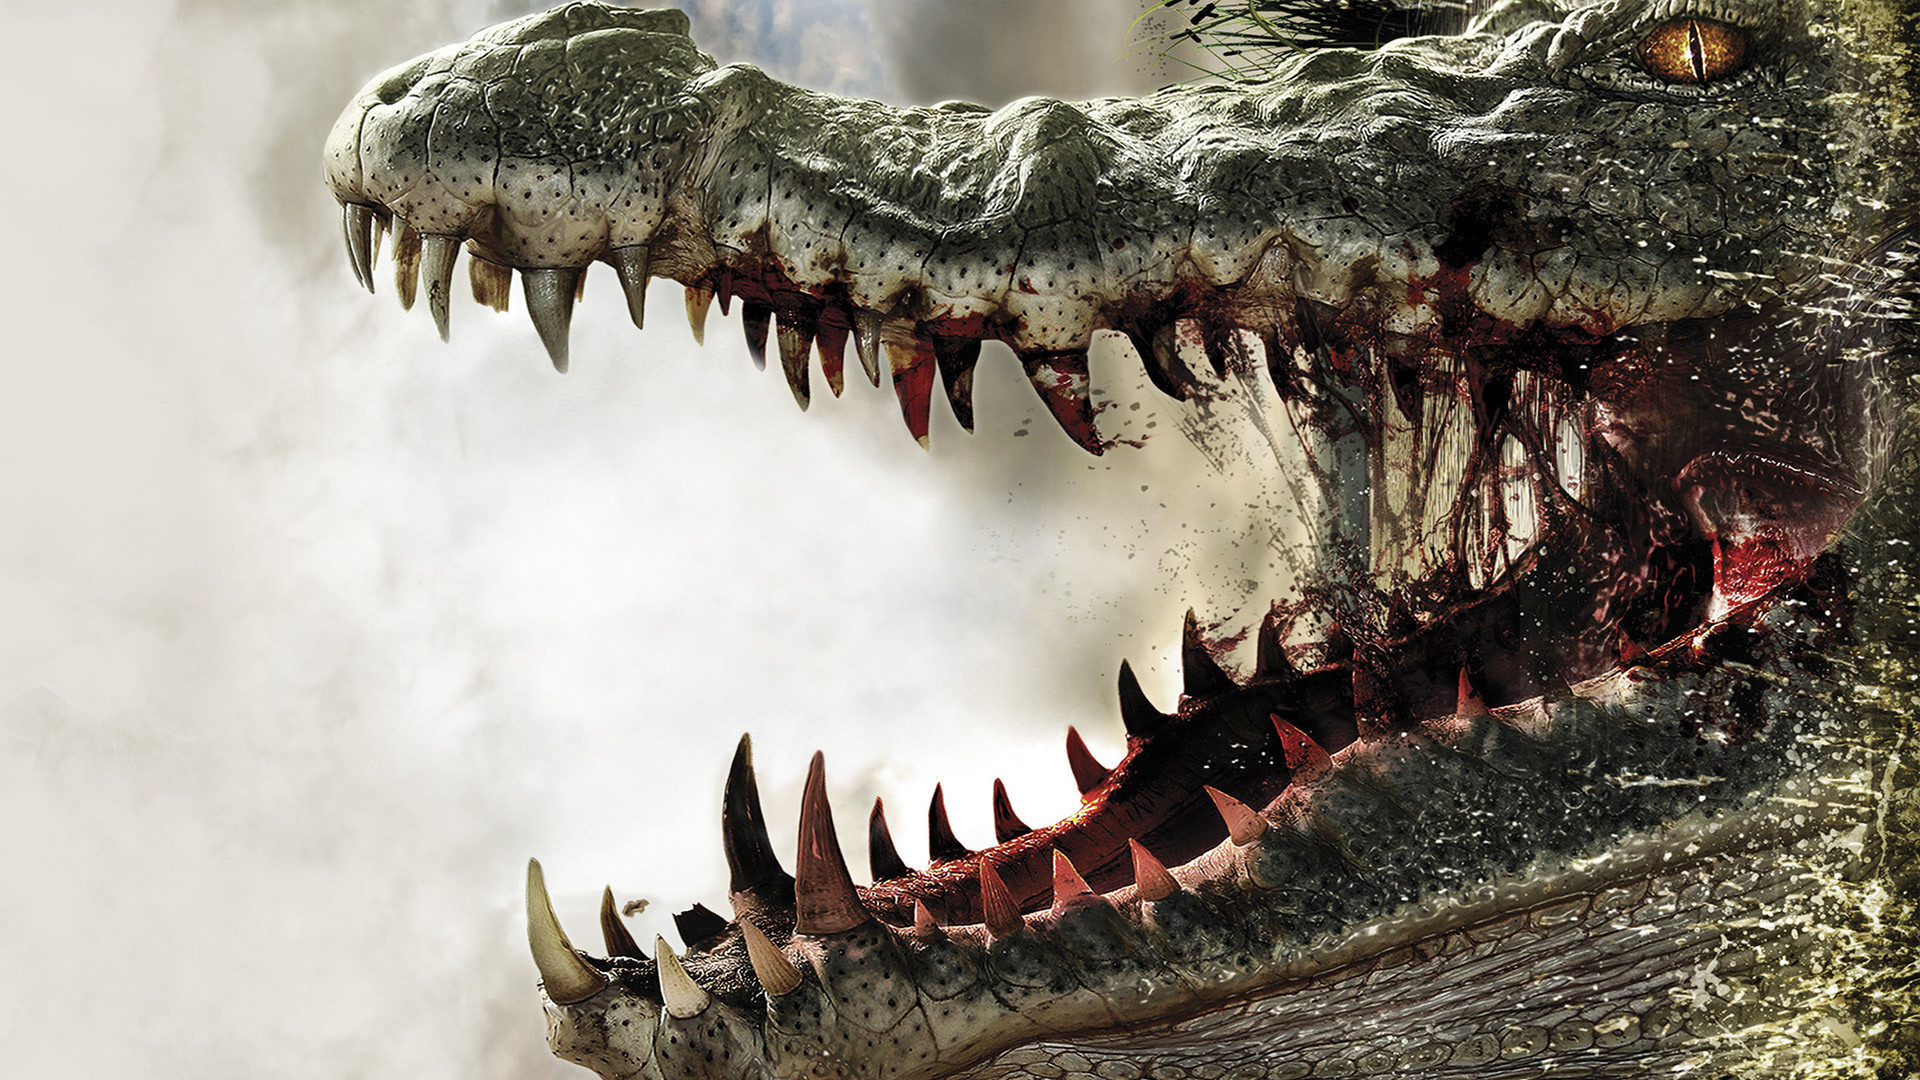 30 Alligator Hd Wallpapers Backgrounds Wallpaper Abyss